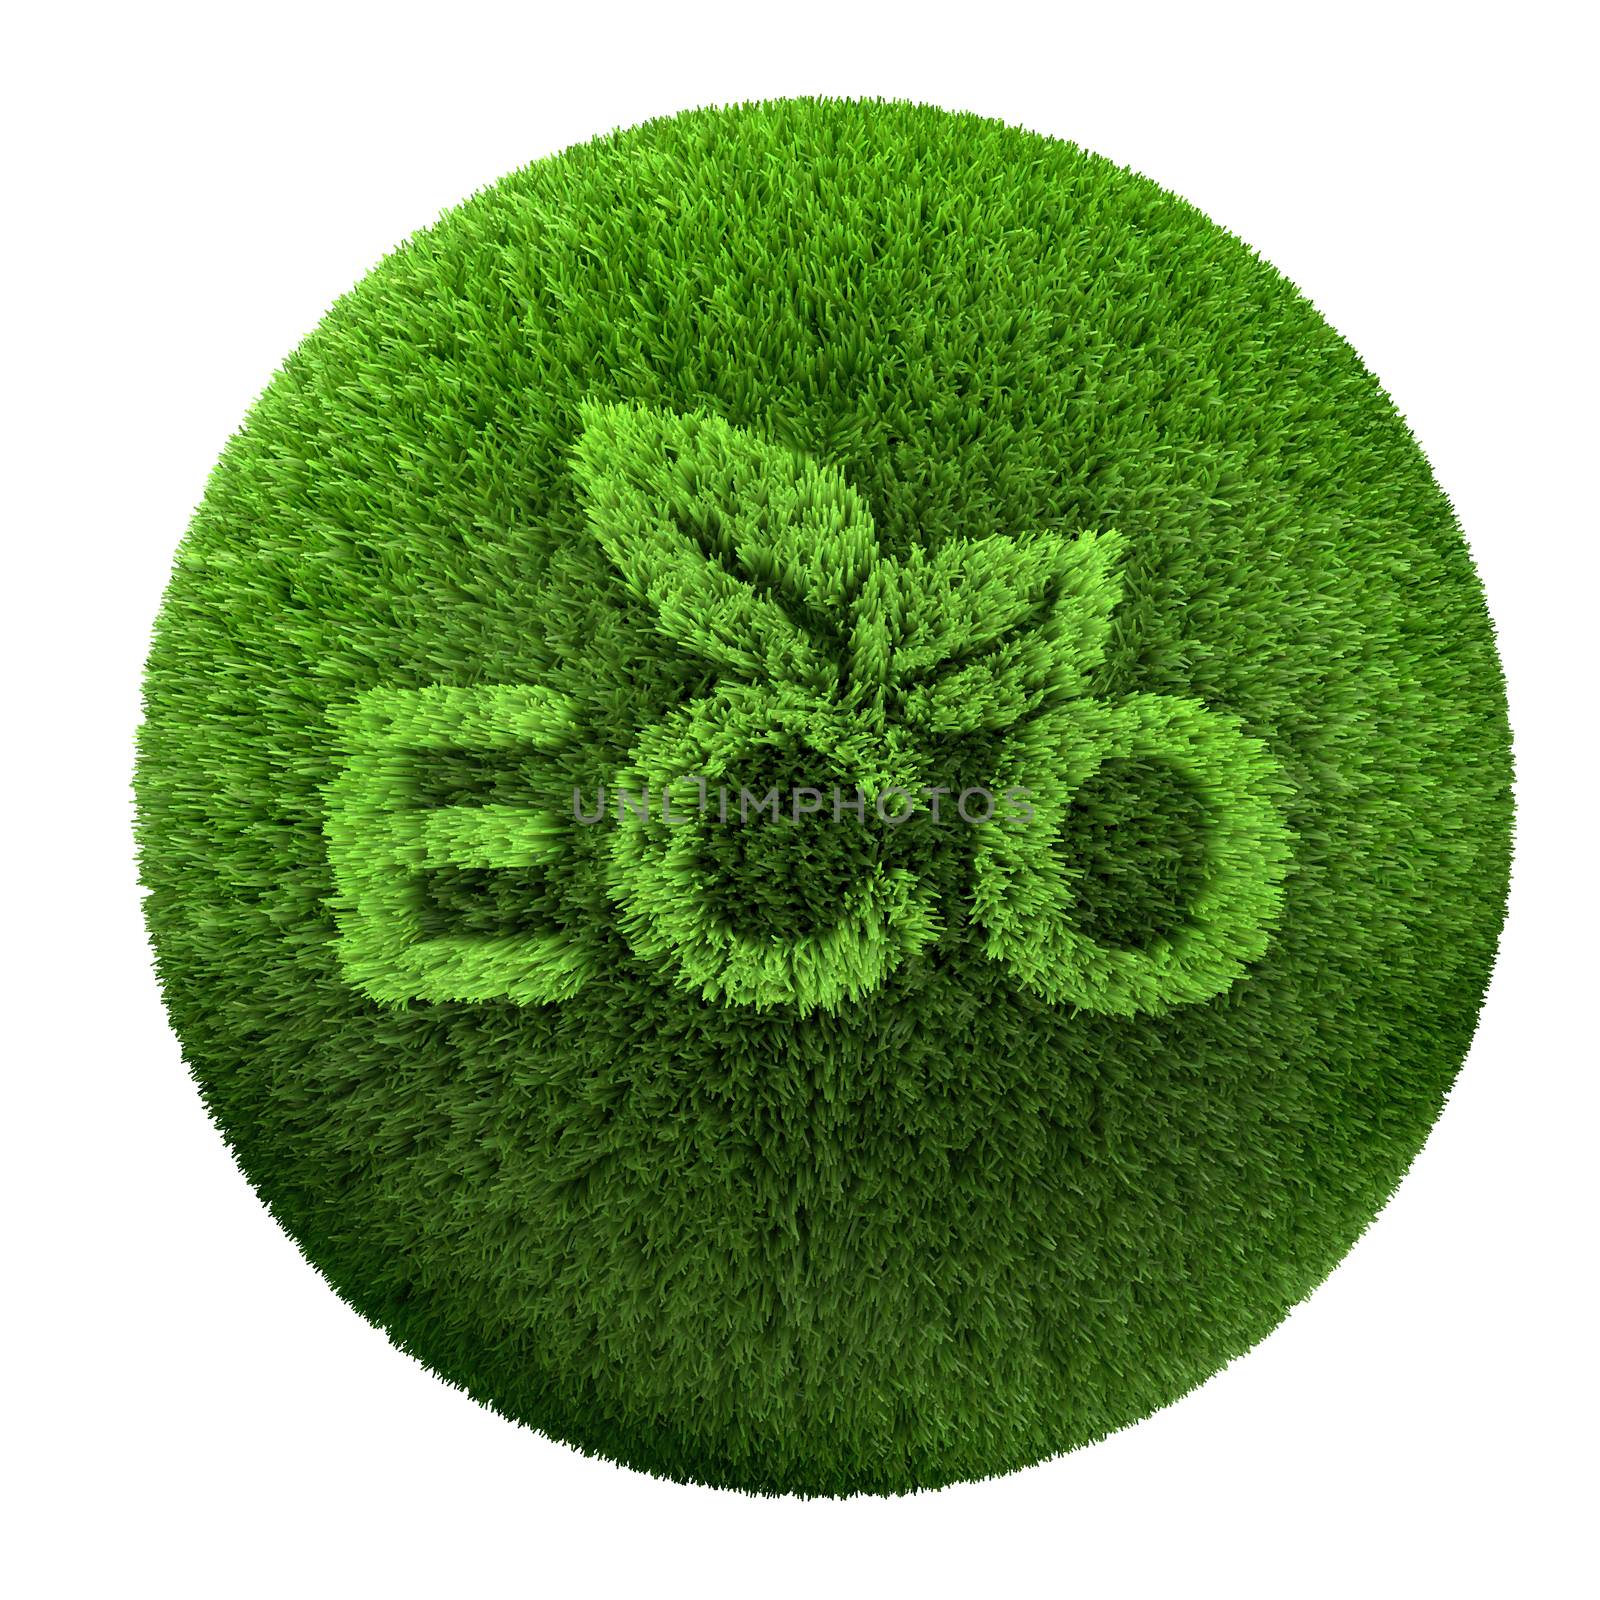 eco symbol grass on the world by kaisorn